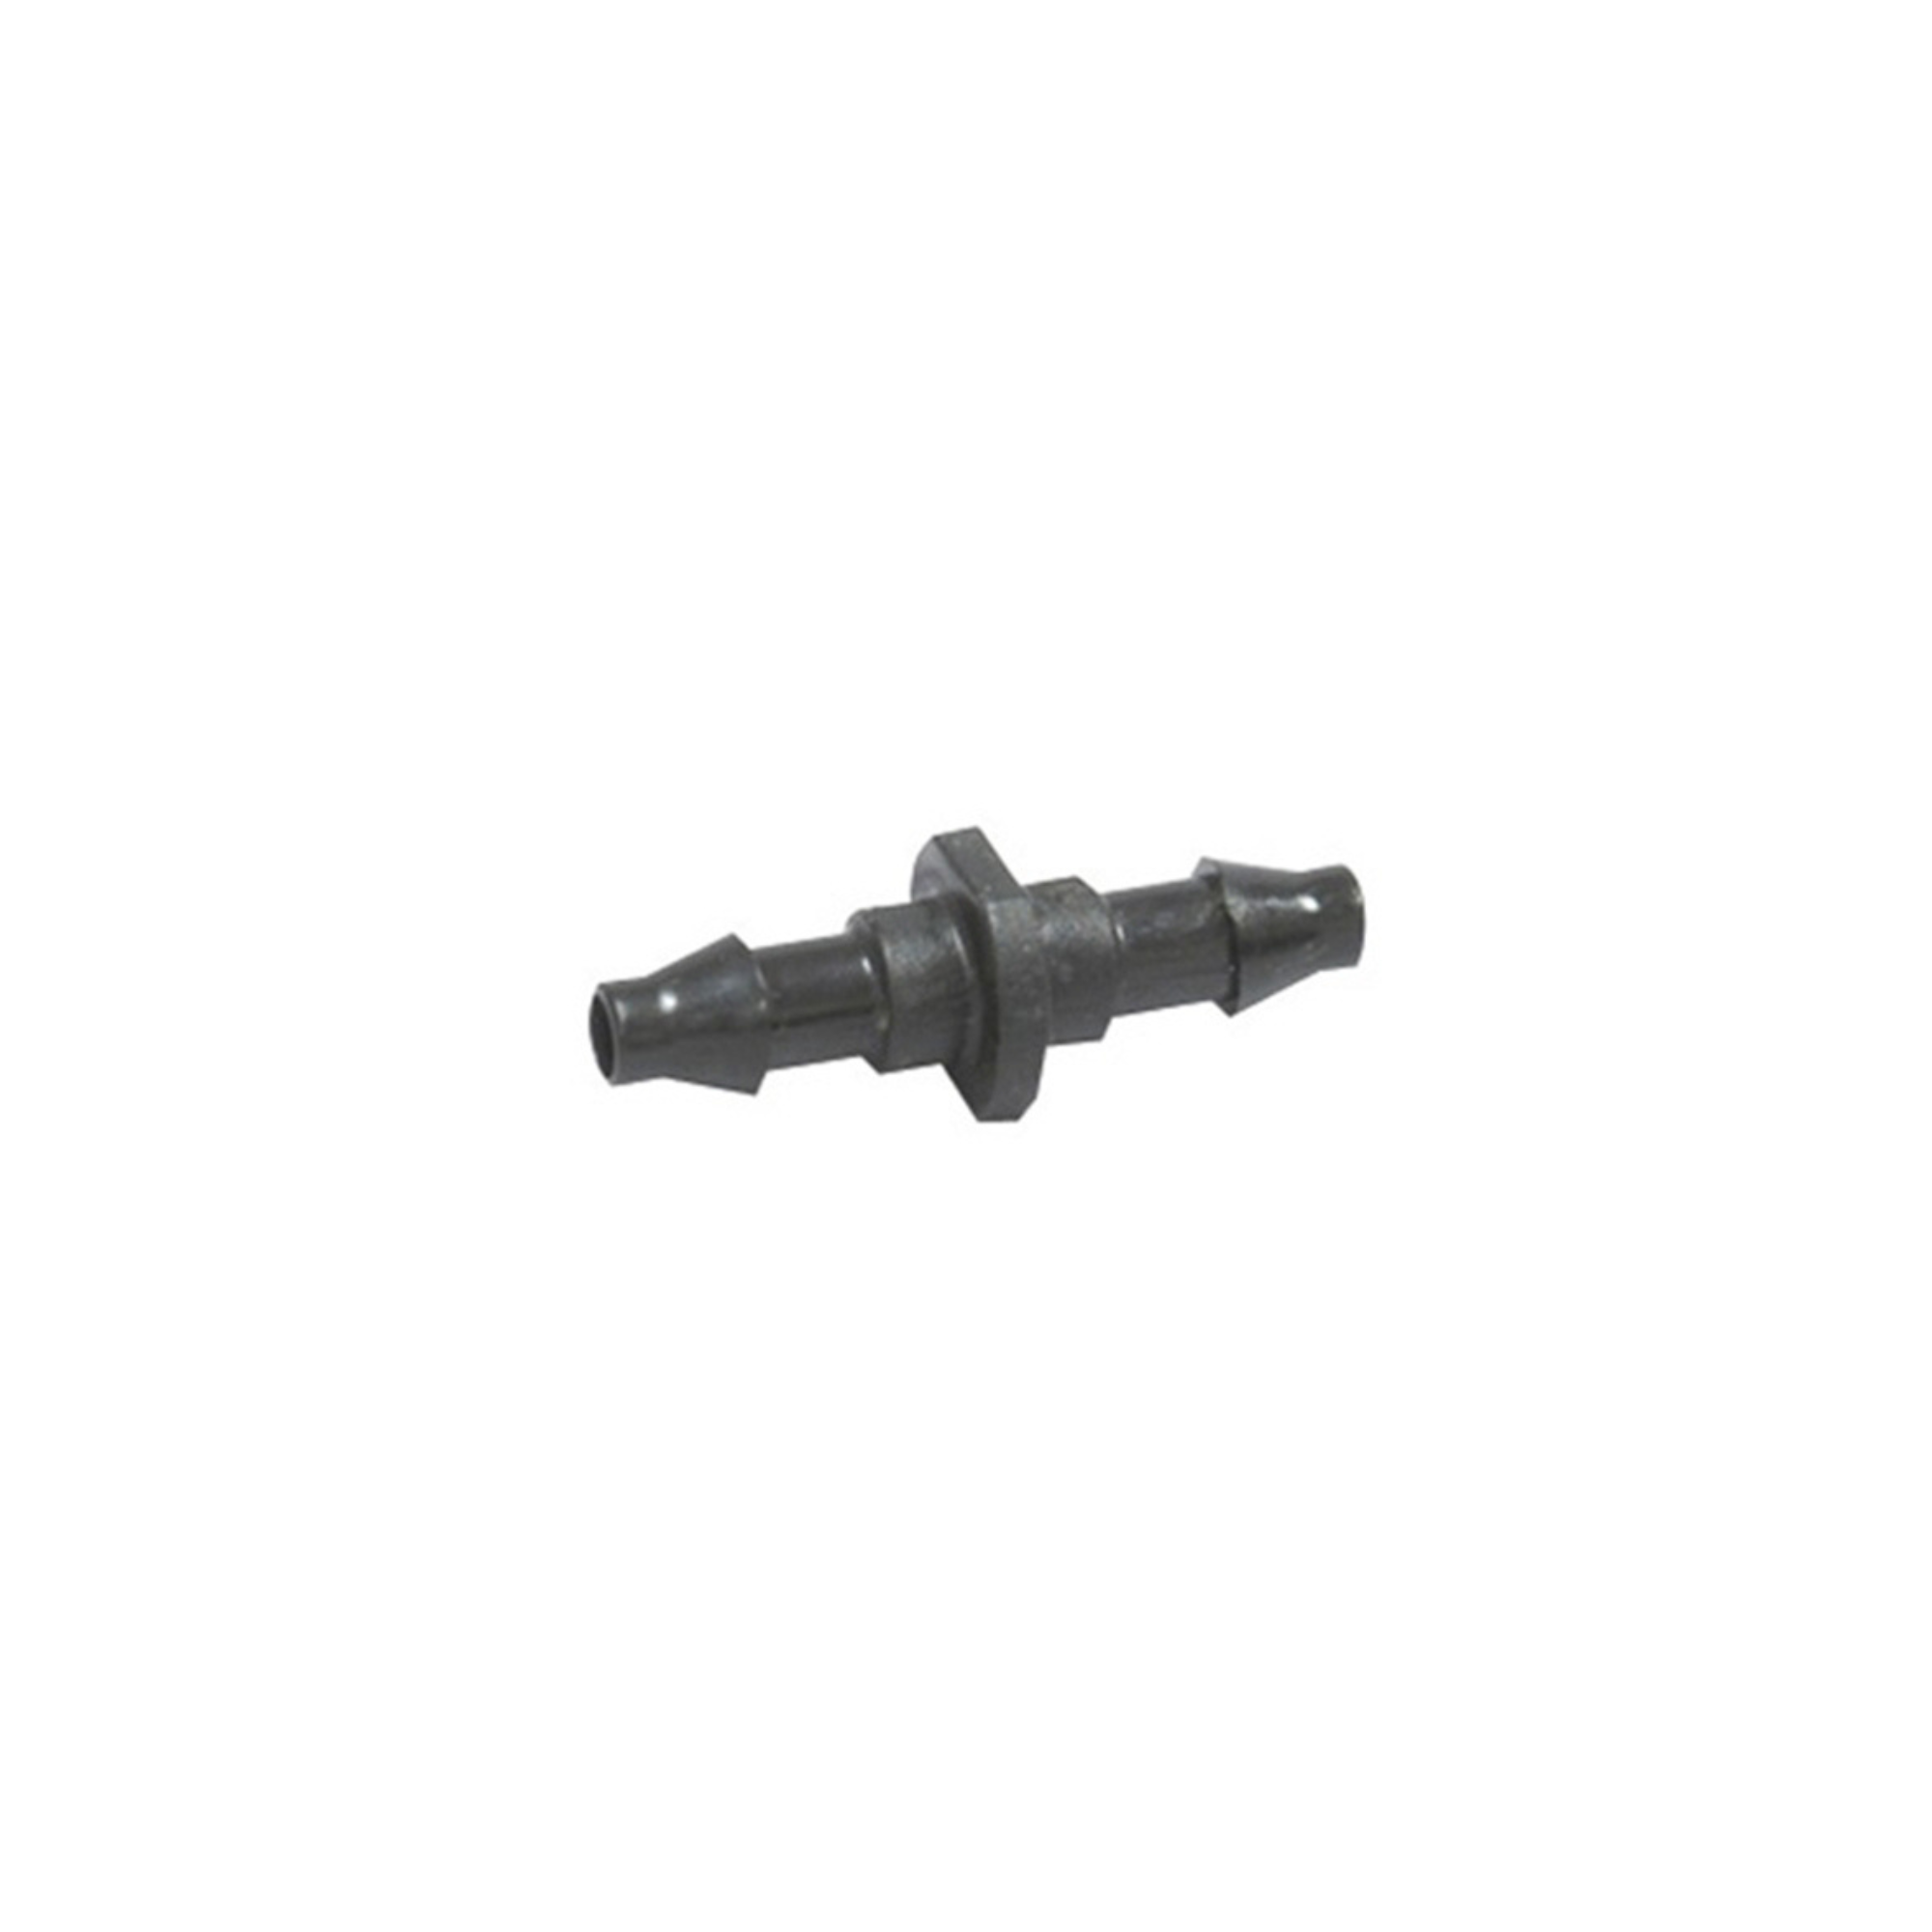 6mm Barbed Connector, pack of 10